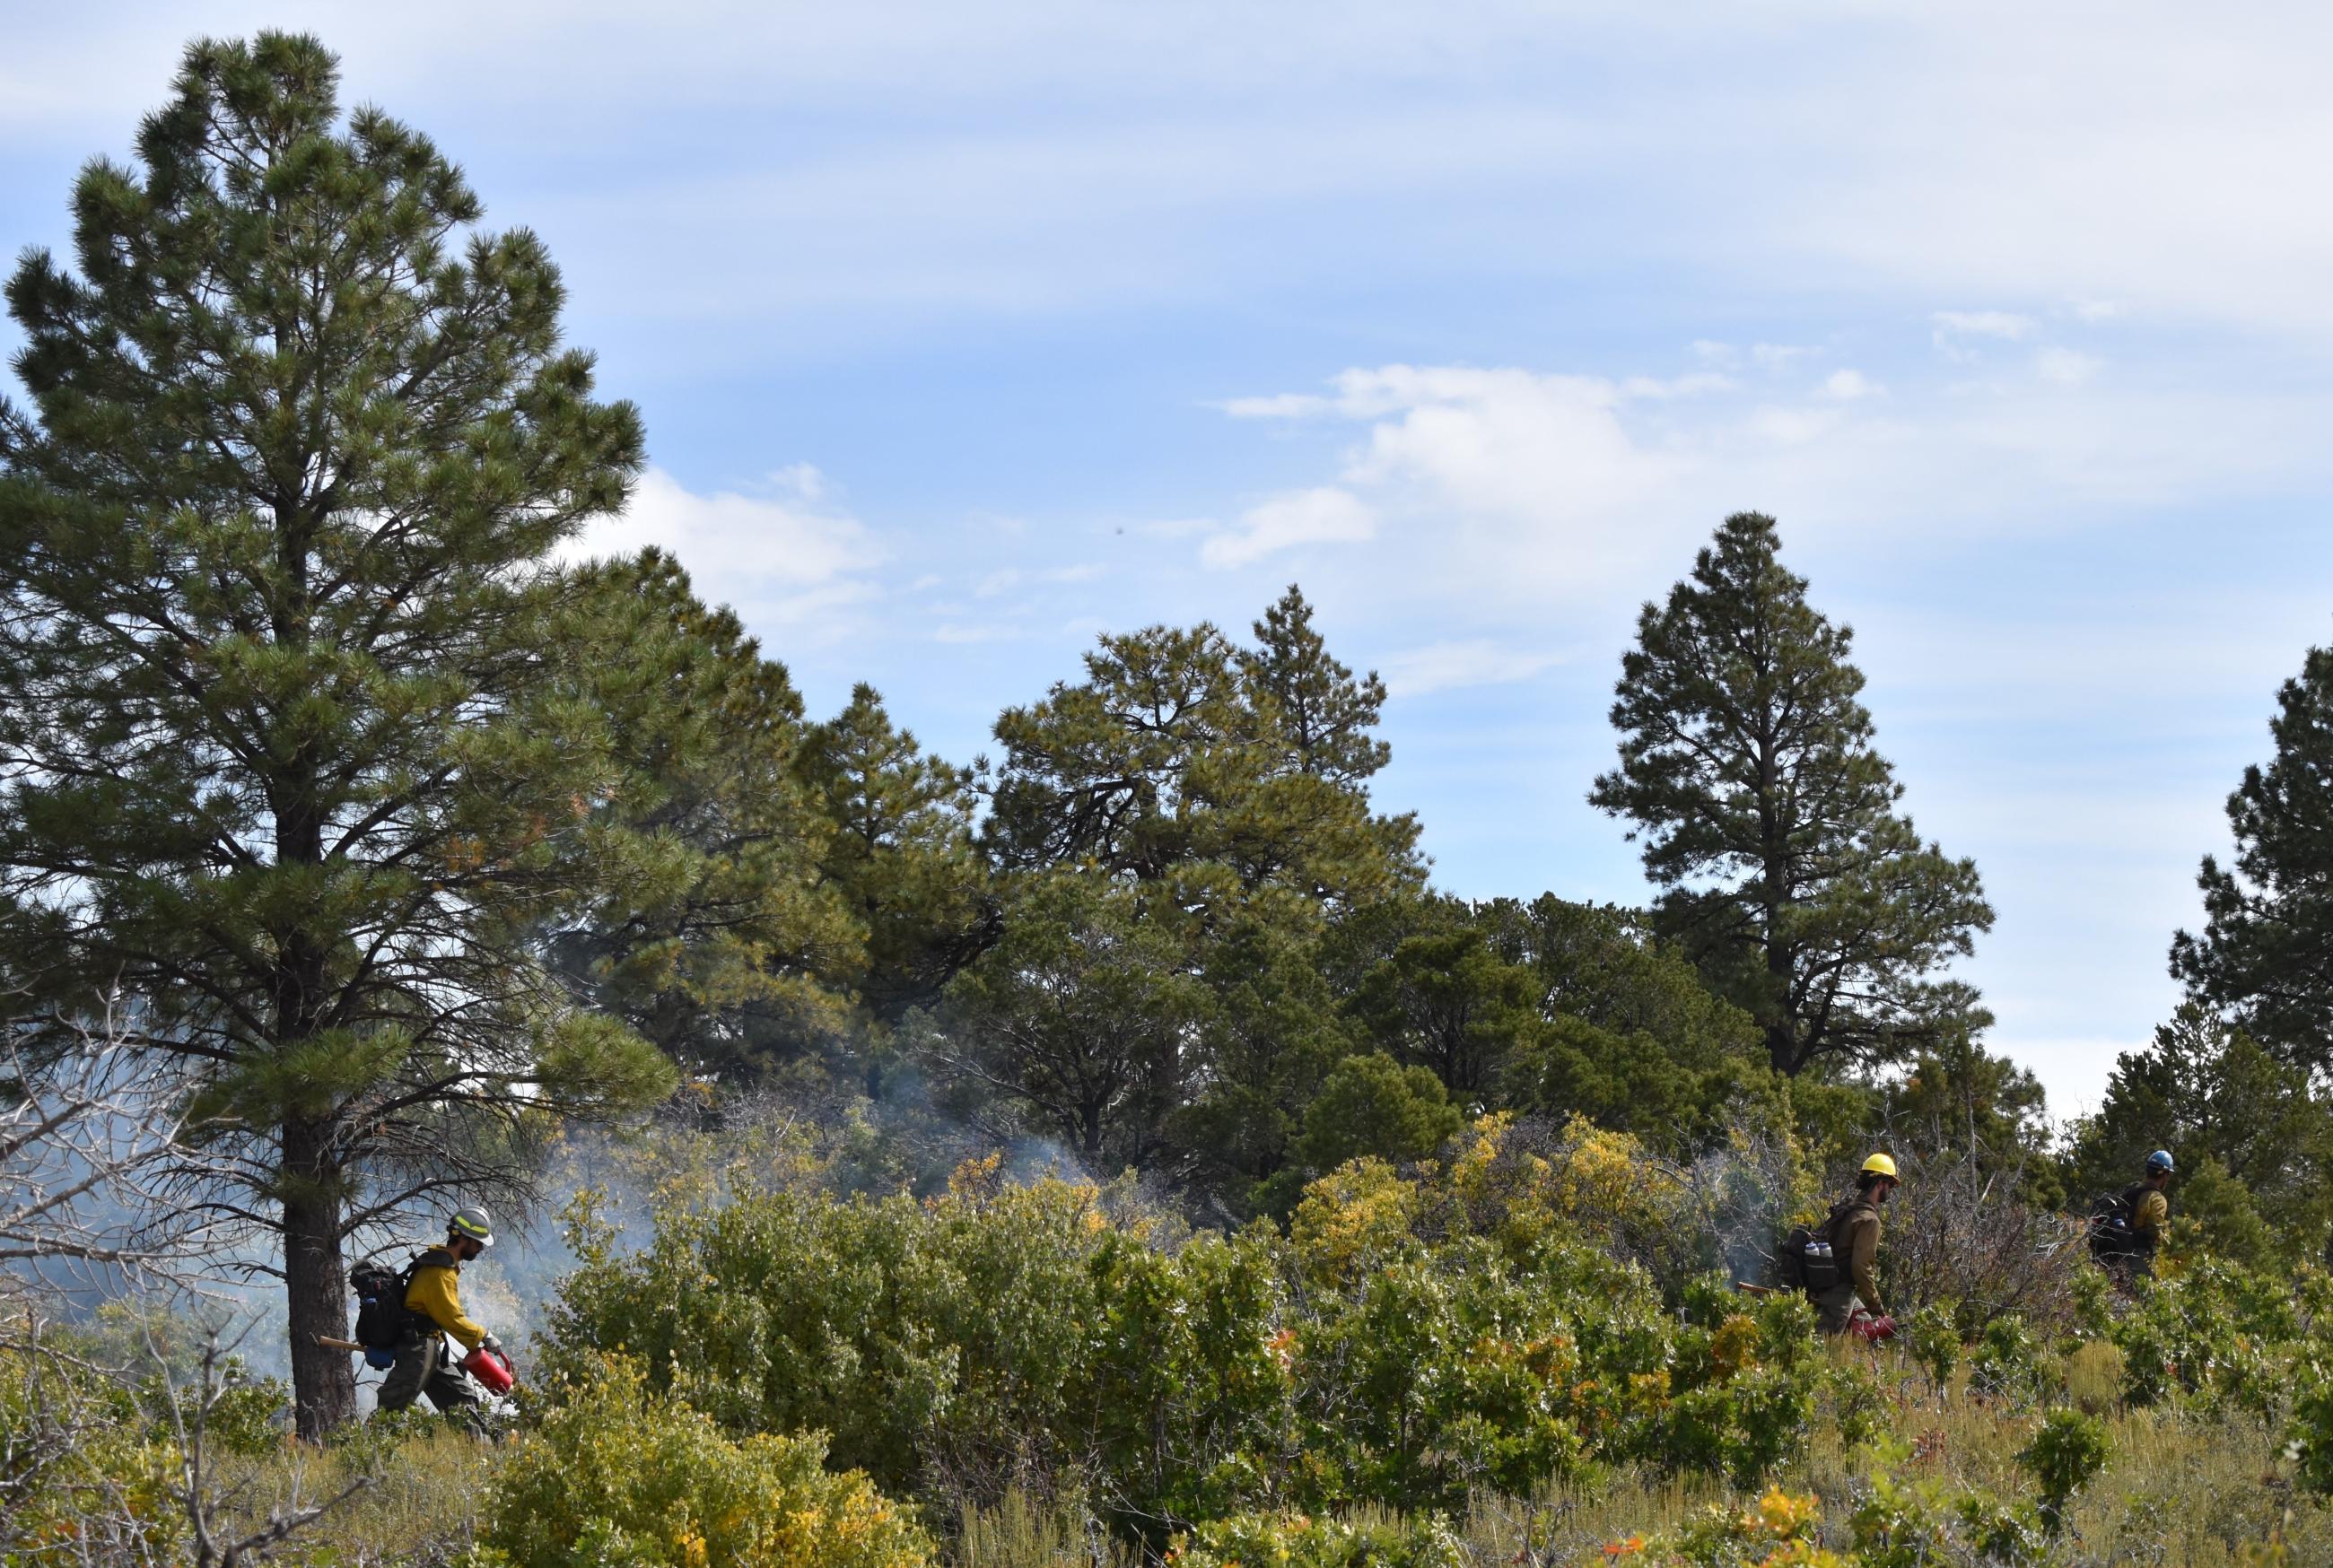 Image of three firefighters walking and using drip torches to ignite vegetation on a prescribed burn. Ponderosa pine, mountain shrubs, grass and smoke